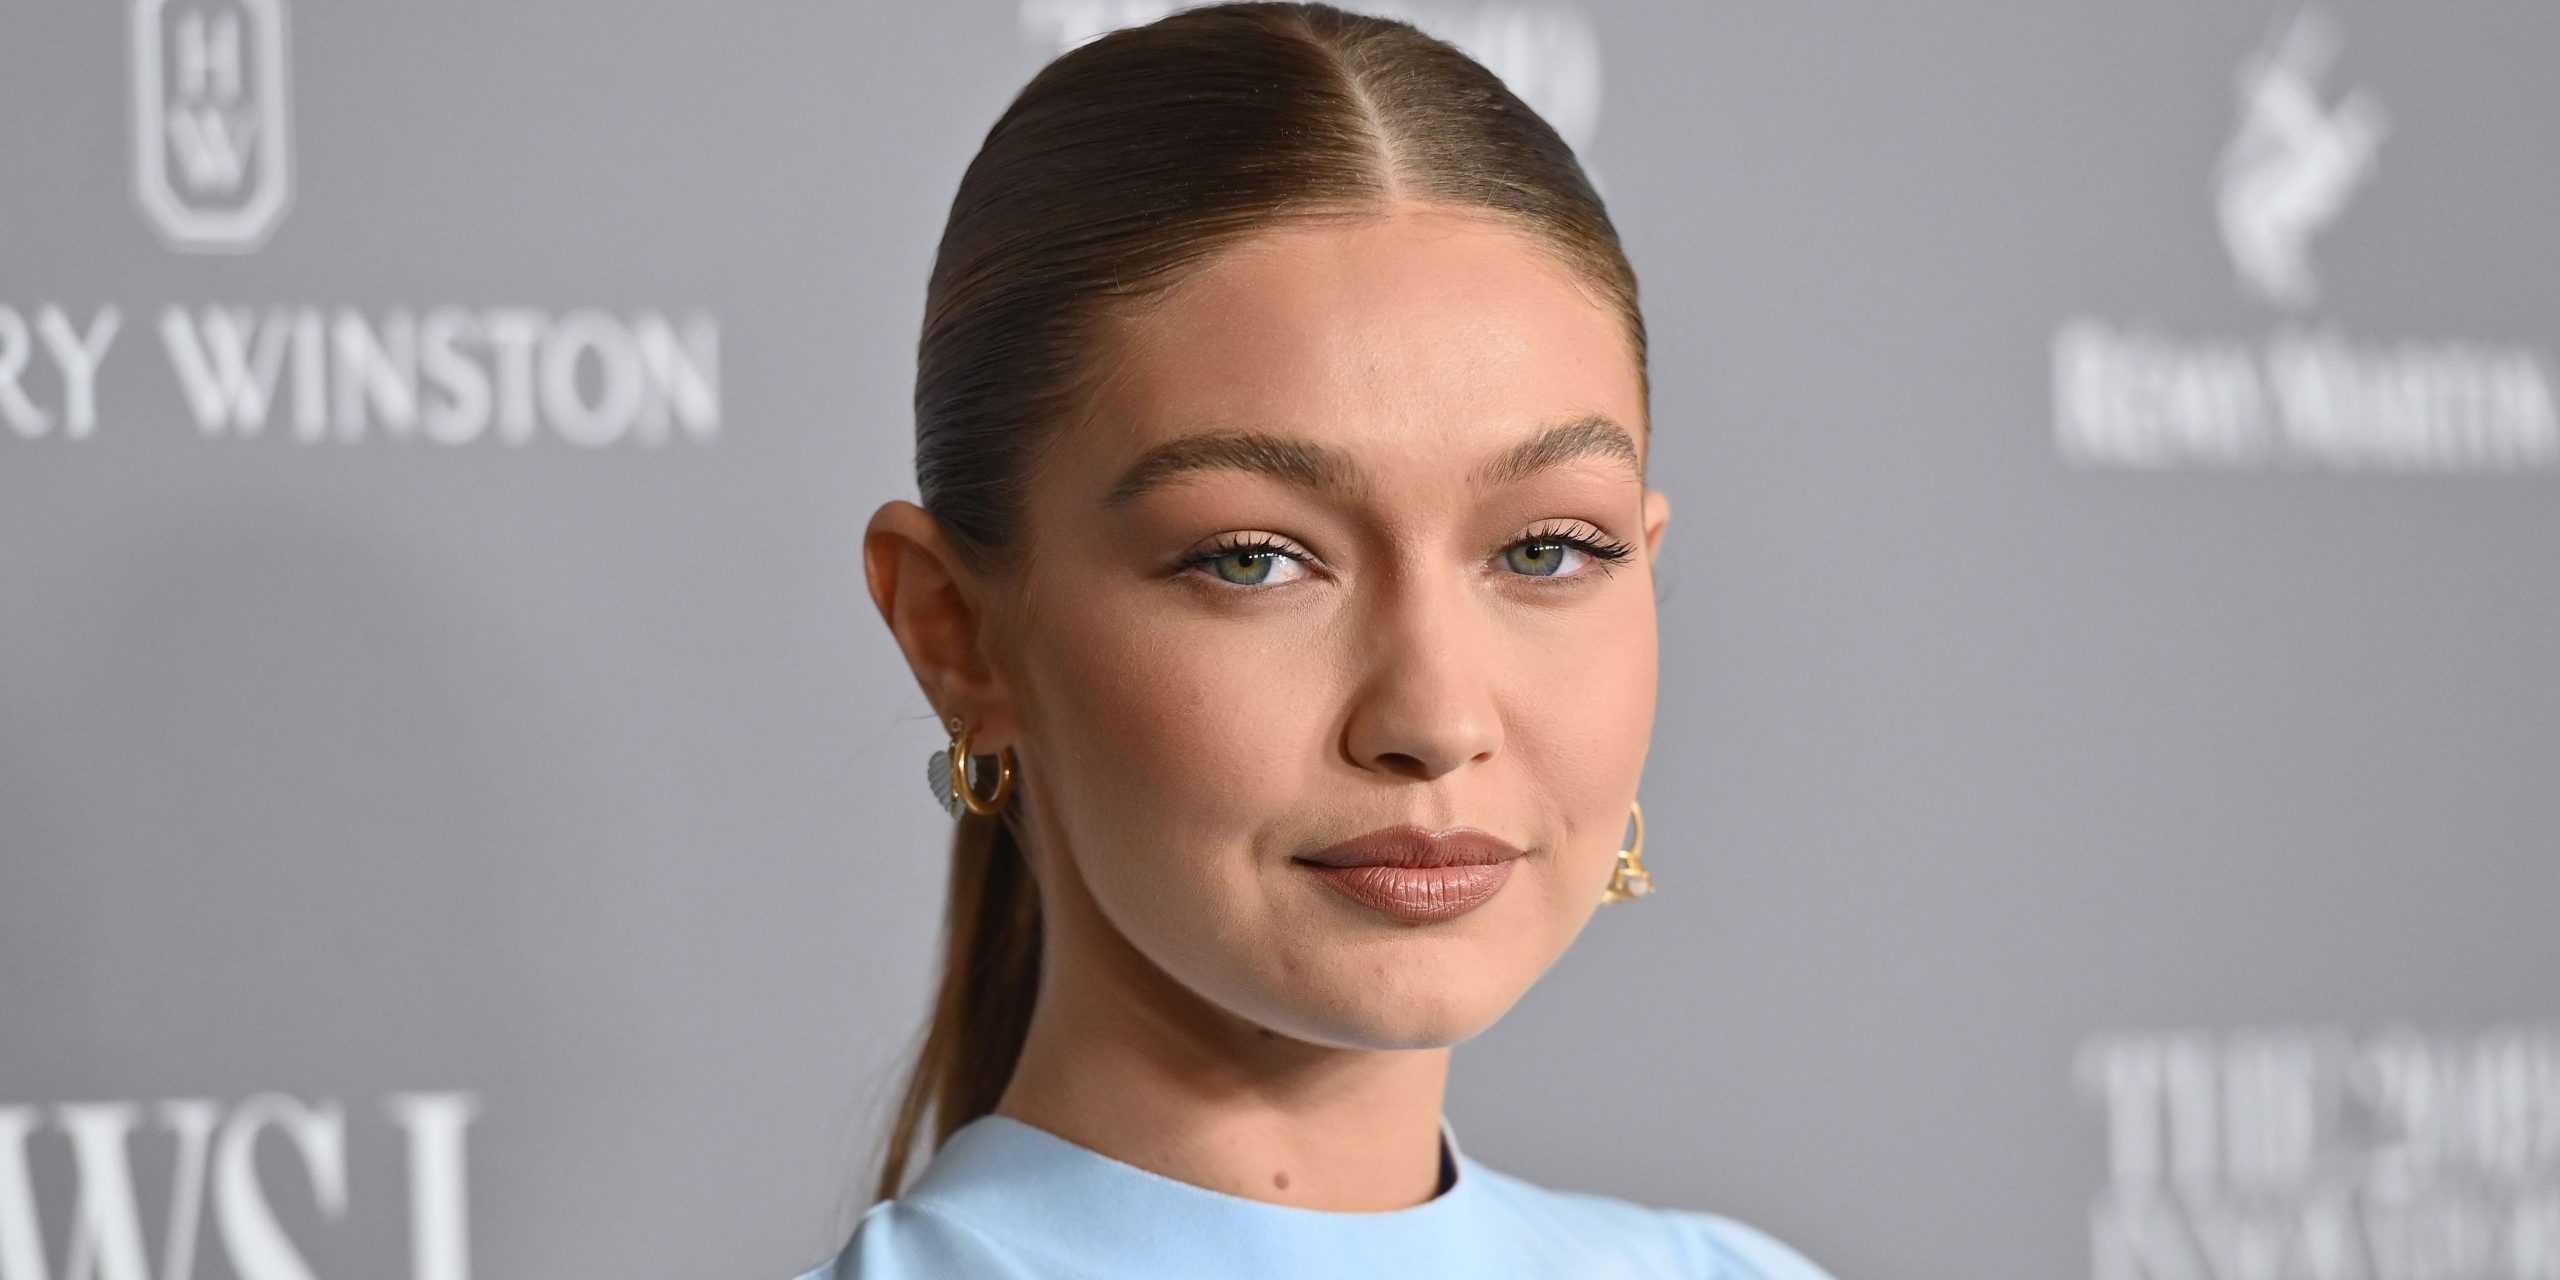 Gigi Hadid said that she voted via absentee ballot with her daughter by her side.